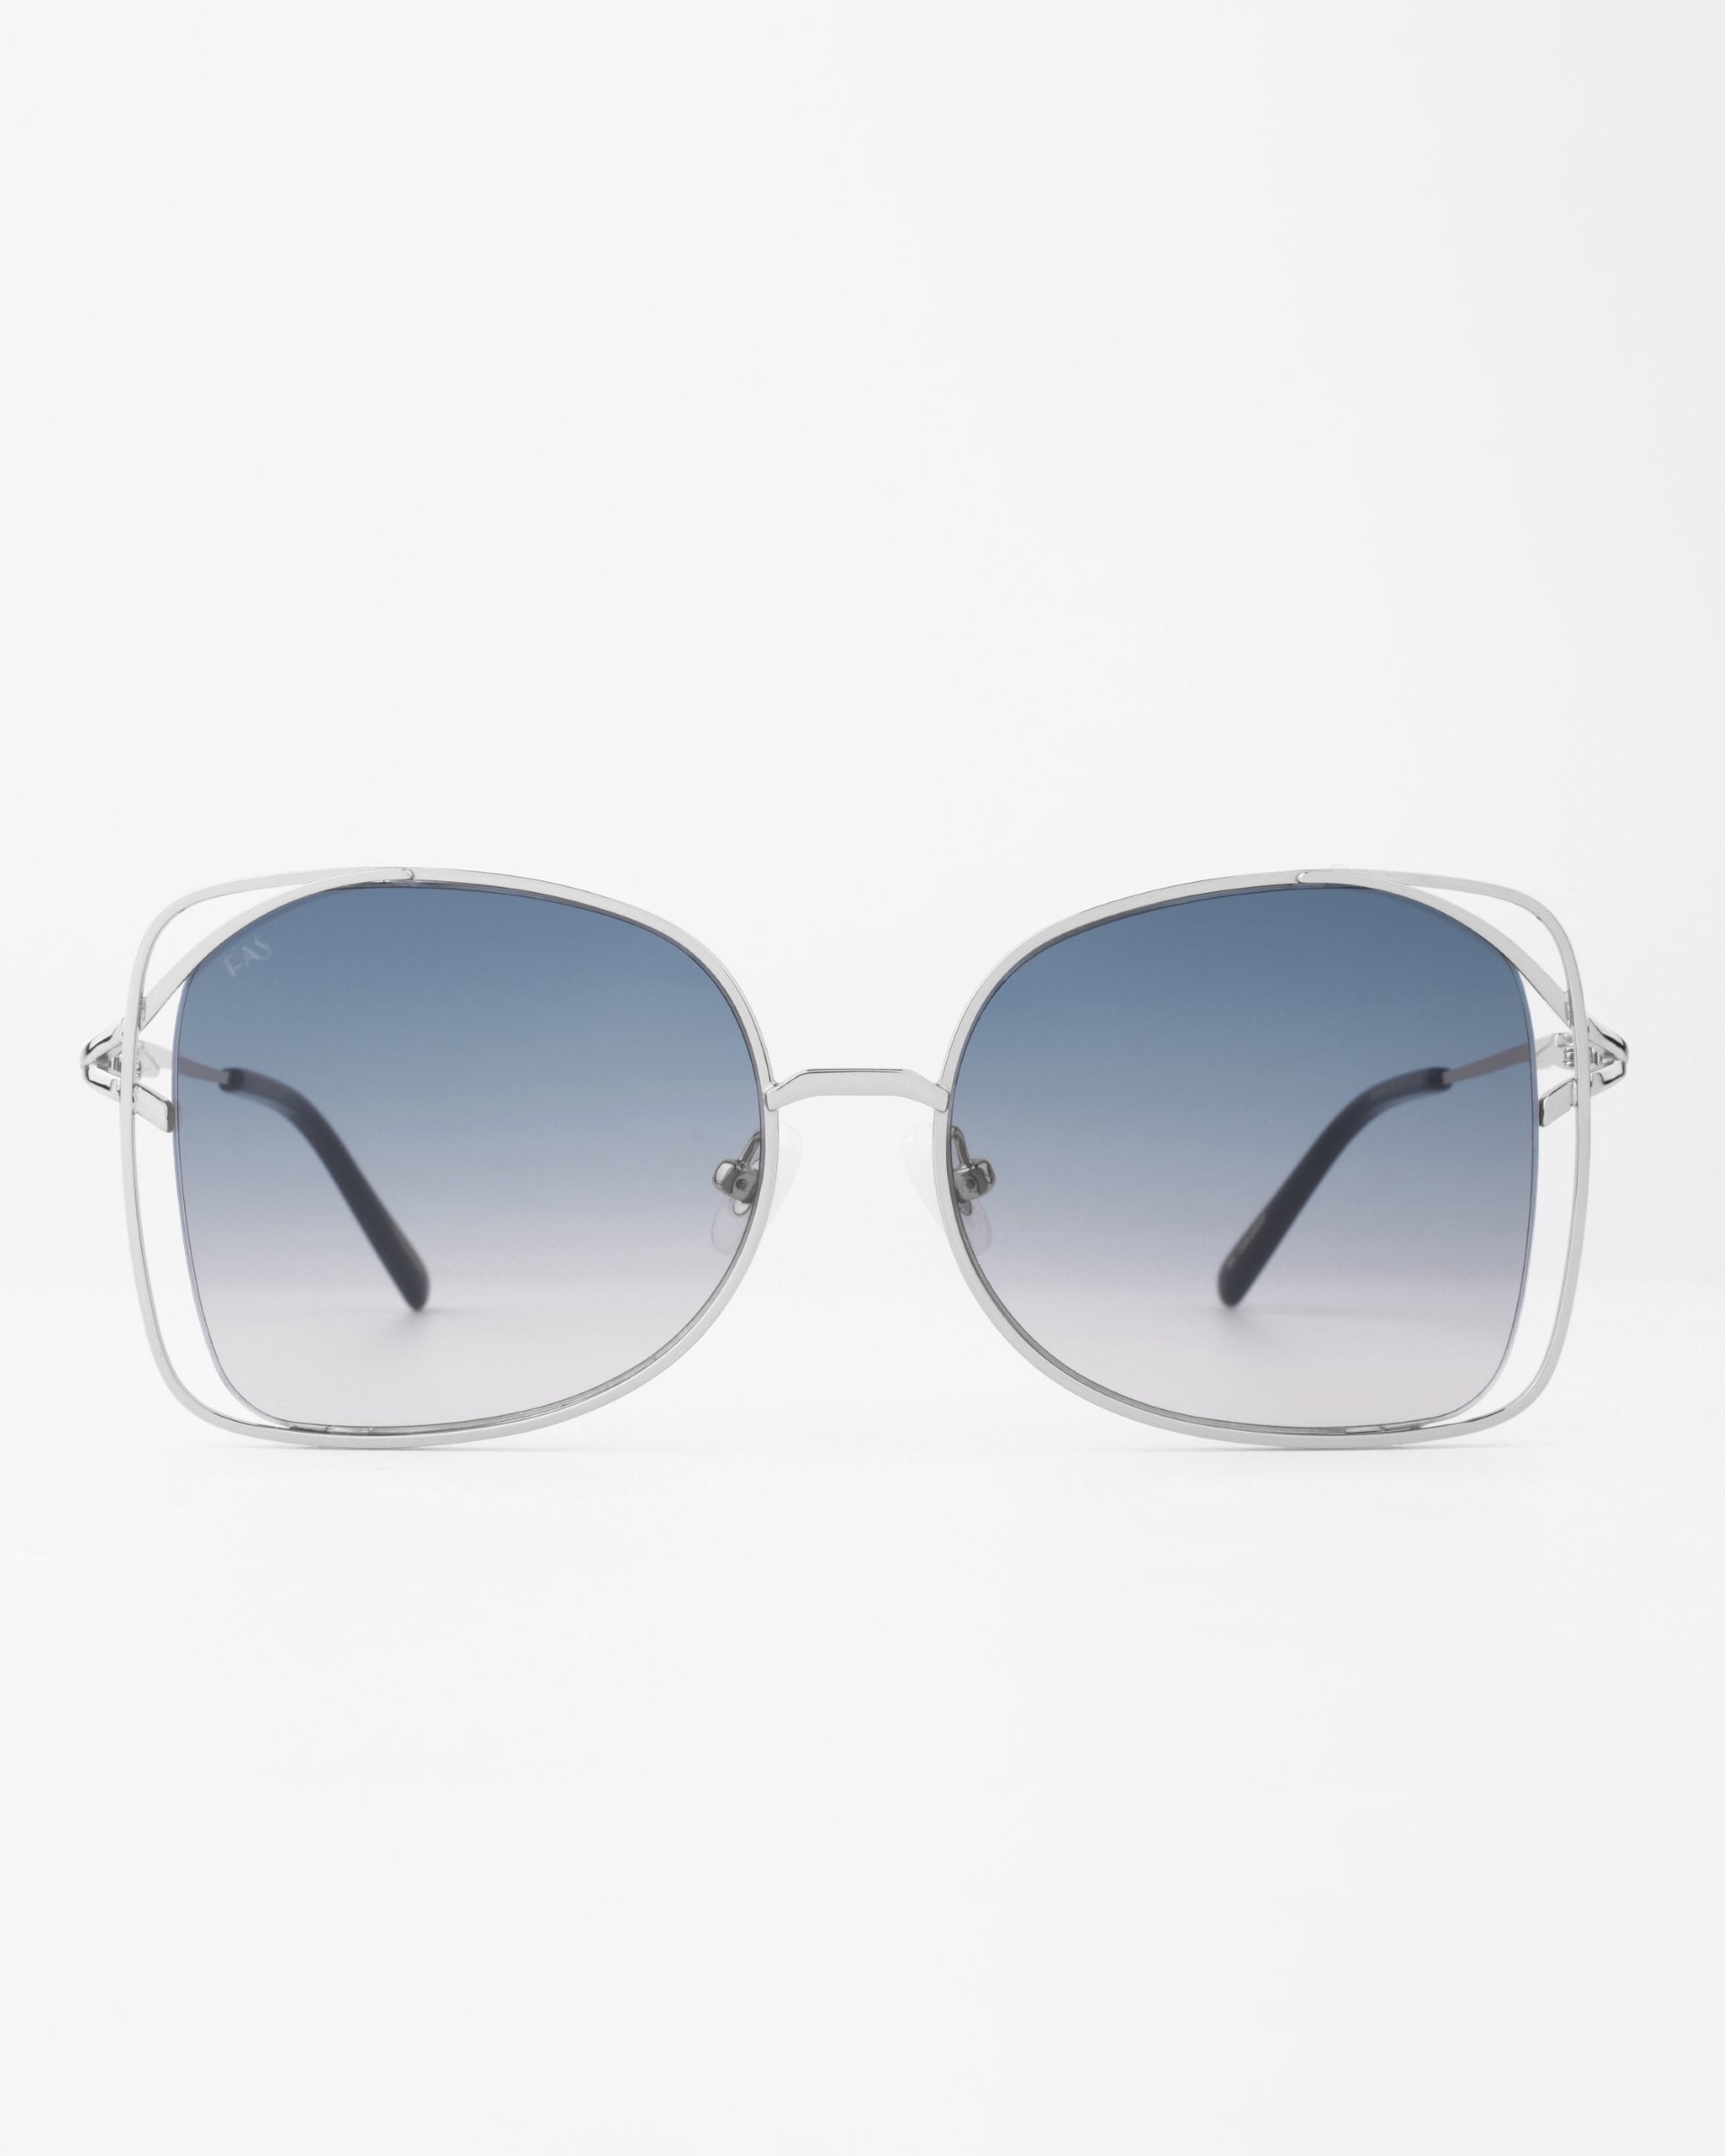 A pair of oversized, handmade Carousel sunglasses from For Art's Sake® with rounded square frames made of thin silver metal. The gradient lenses transition from dark blue at the top to clear at the bottom, providing UVA & UVB protection. The sunglasses feature thin arms with black tips. The background is plain white.